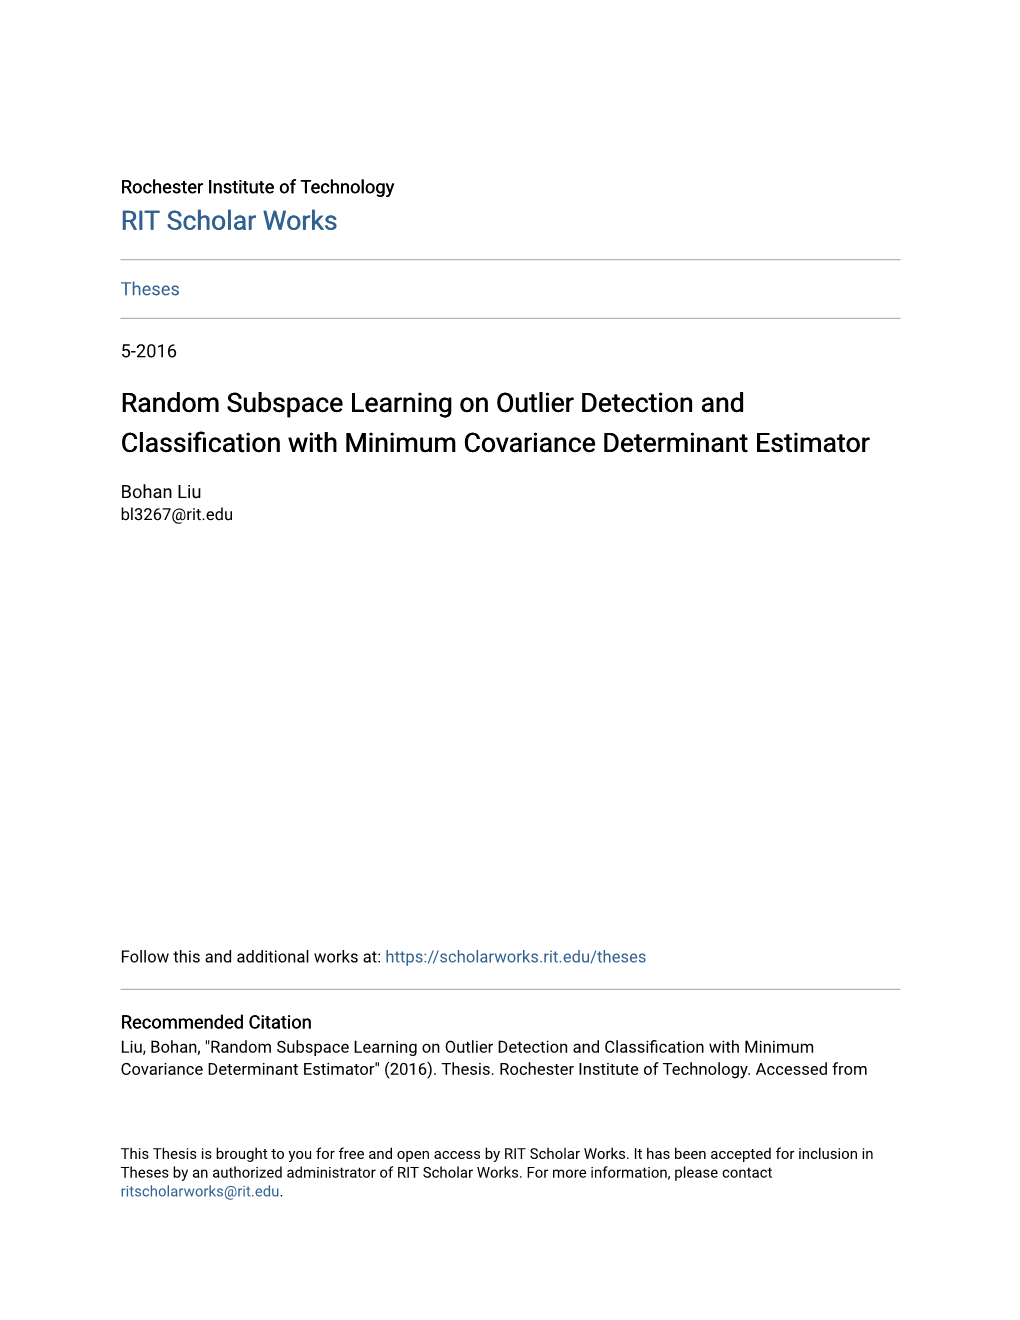 Random Subspace Learning on Outlier Detection and Classification with Minimum Covariance Determinant Estimator